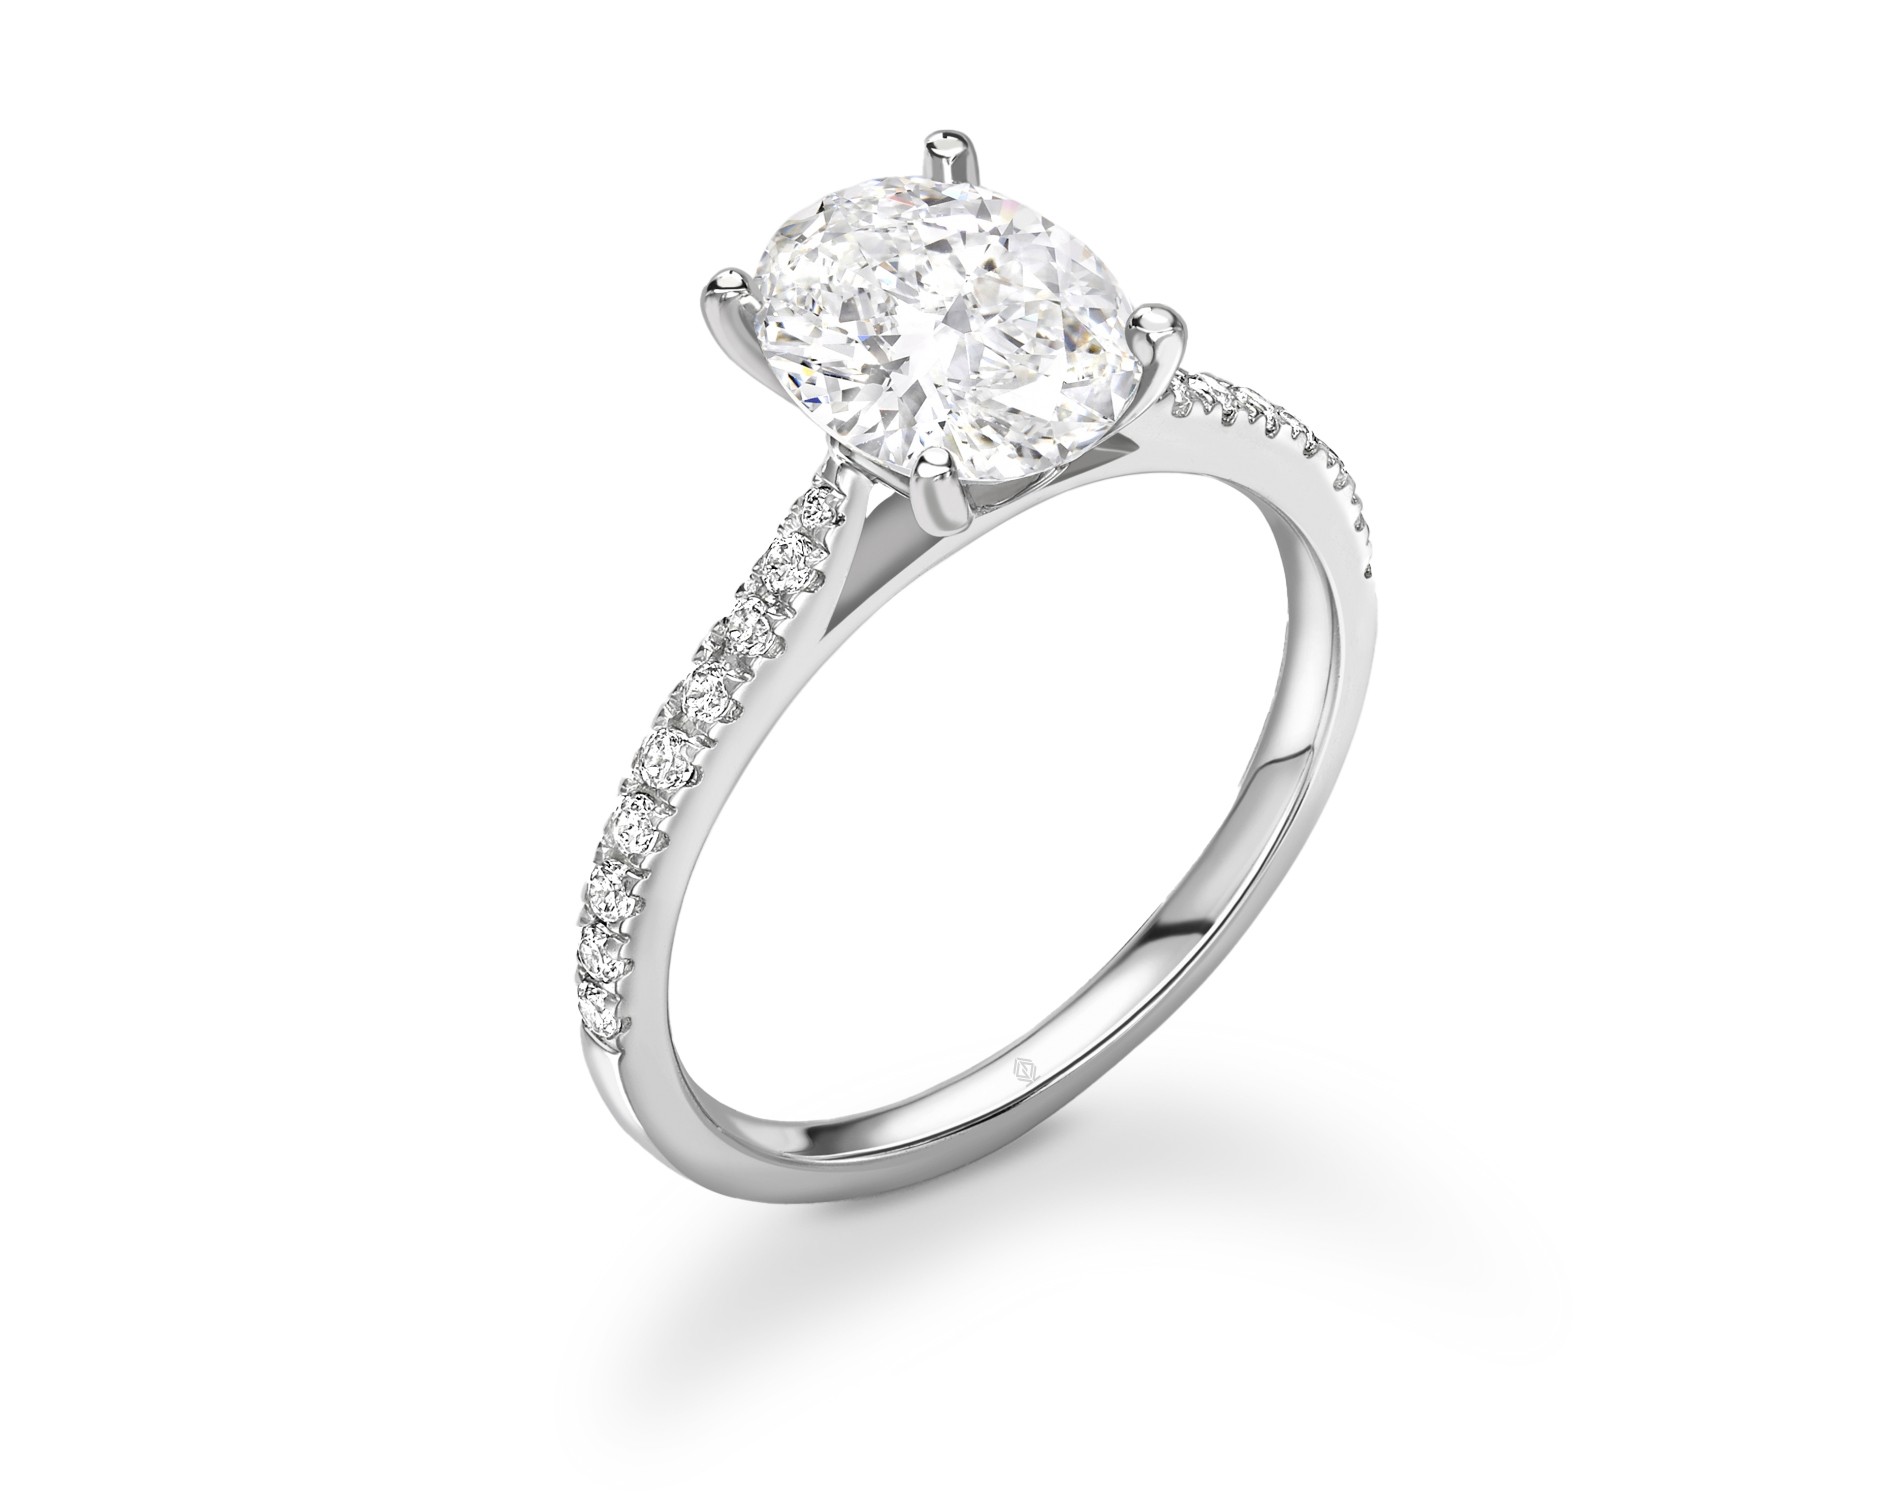 18K WHITE GOLD OVAL CUT 4 PRONGS DIAMOND ENGAGEMENT RING WITH SIDE STONES PAVE SET